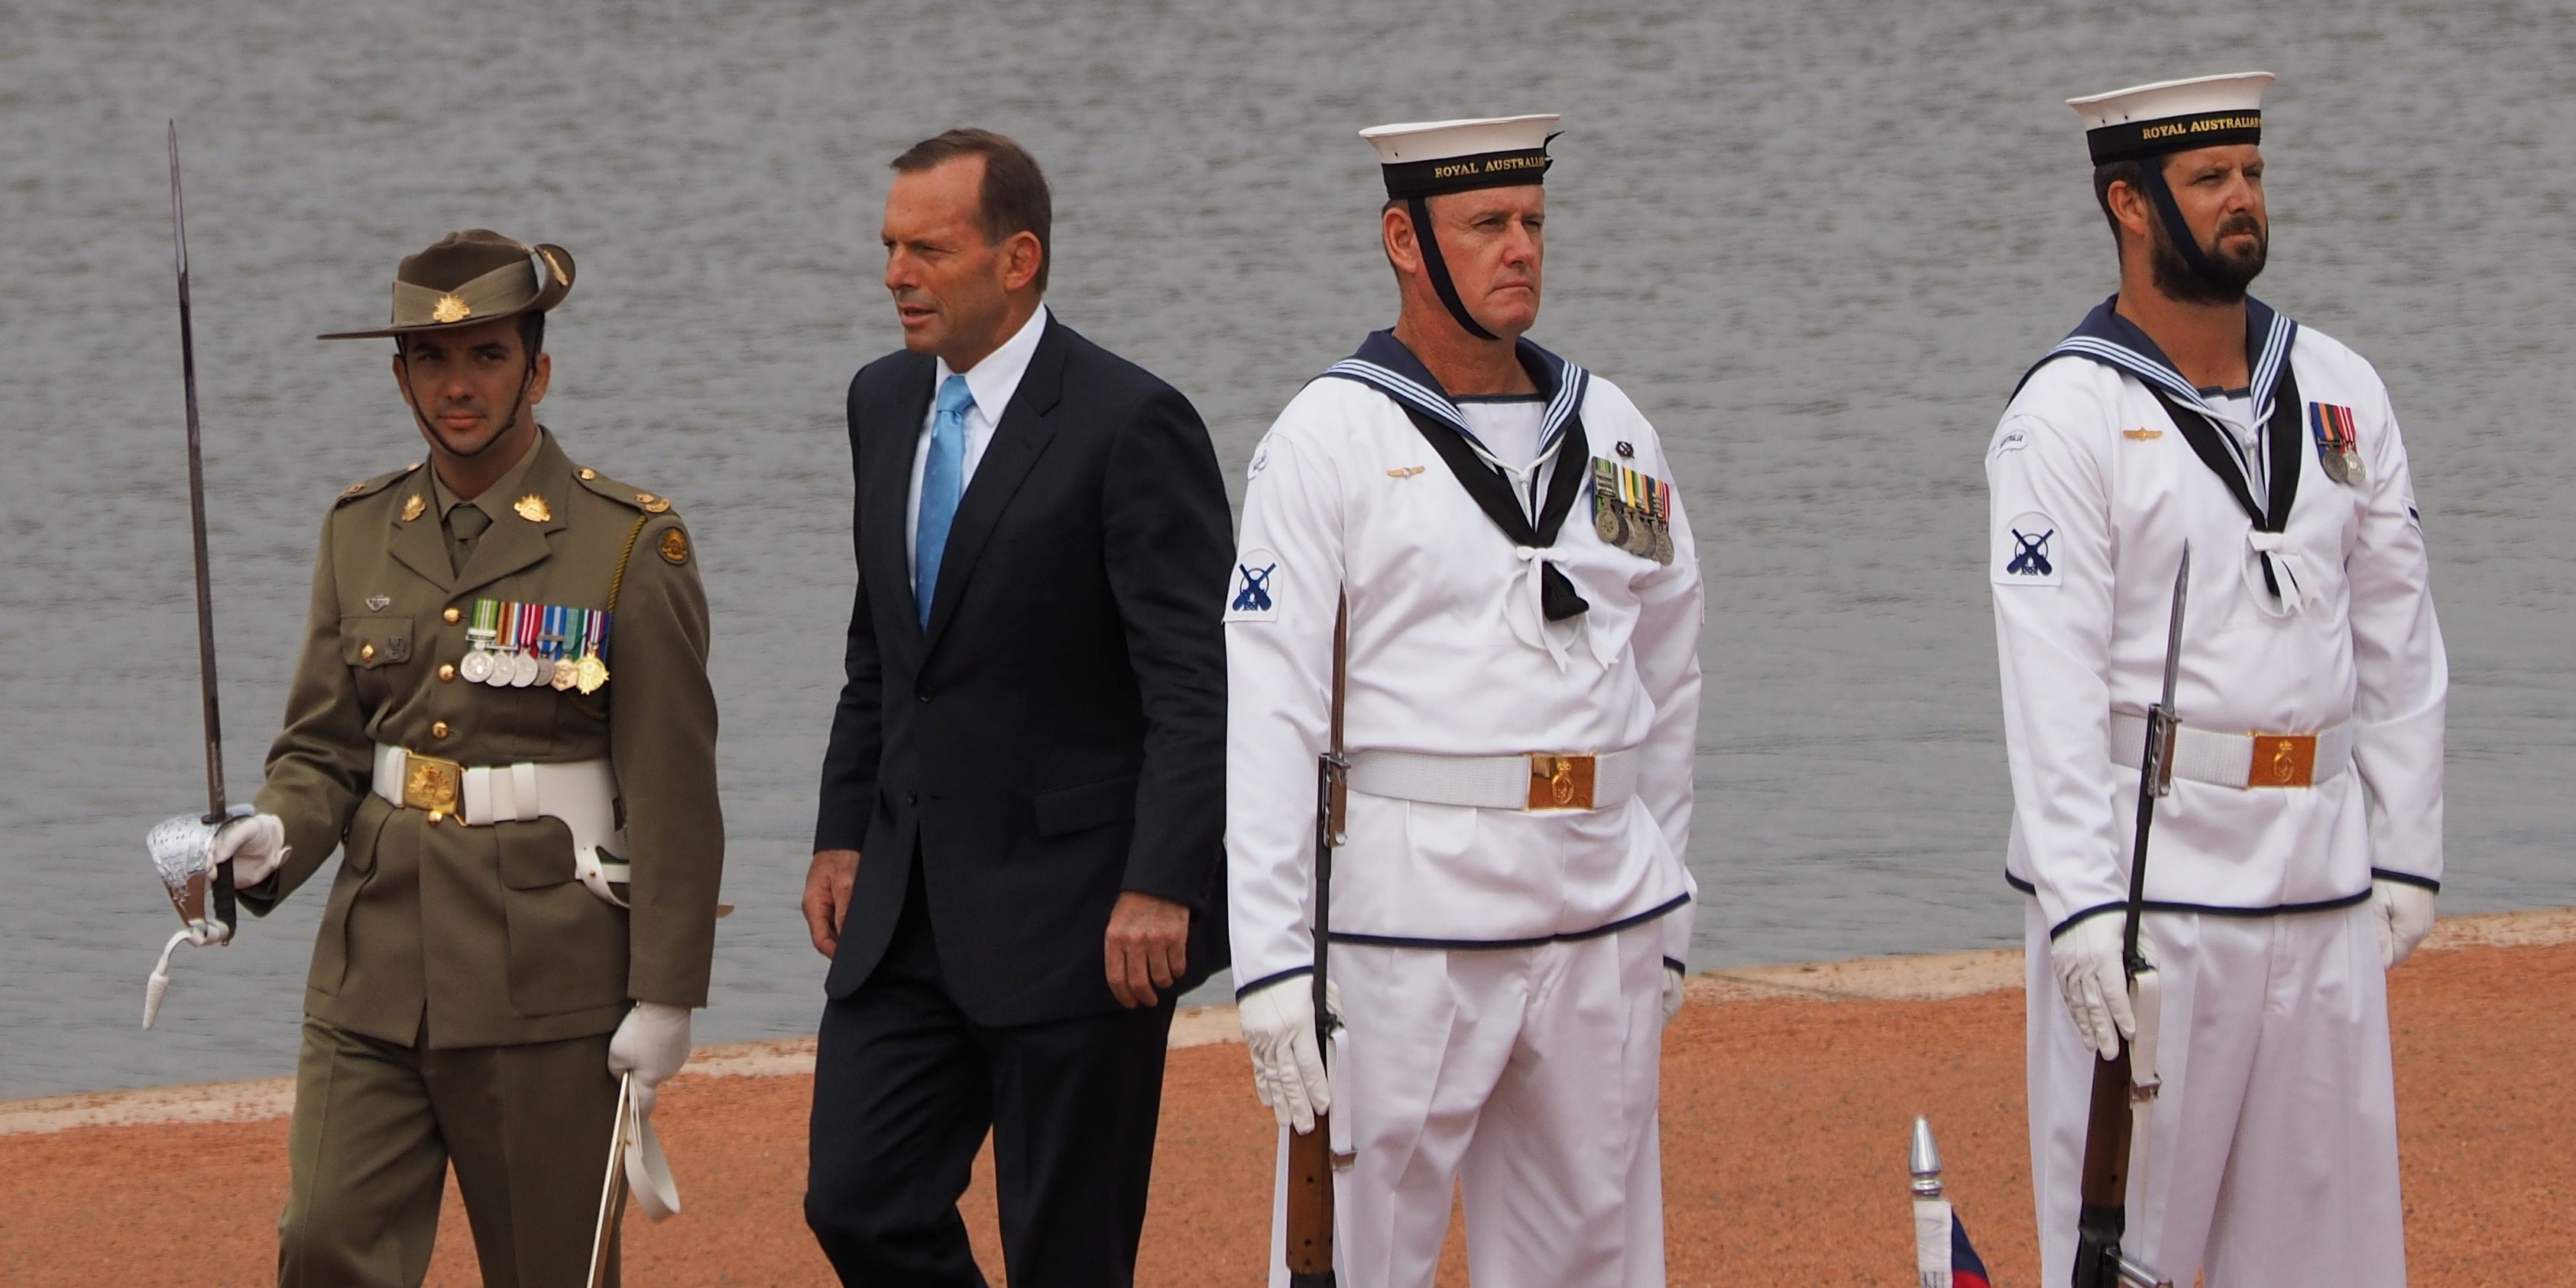 Tony Abbott: the expert the UK has been waiting for?